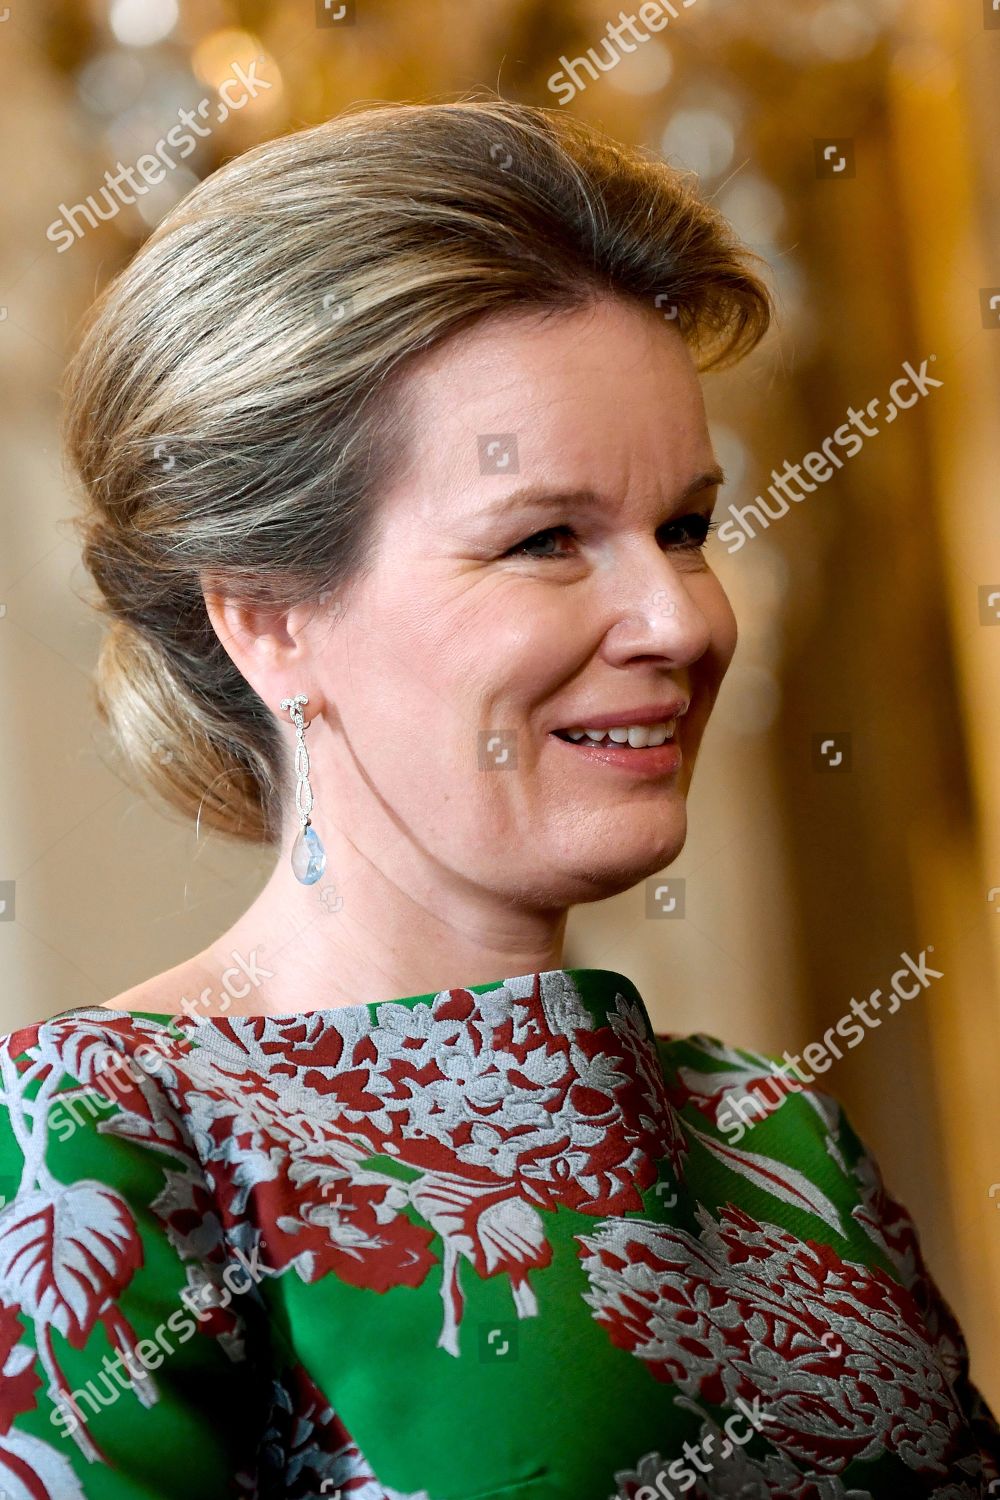 CASA REAL BELGA - Página 93 King-philippe-and-queen-mathilde-receive-the-heads-of-diplomatic-missions-brussels-belgium-shutterstock-editorial-10525487p